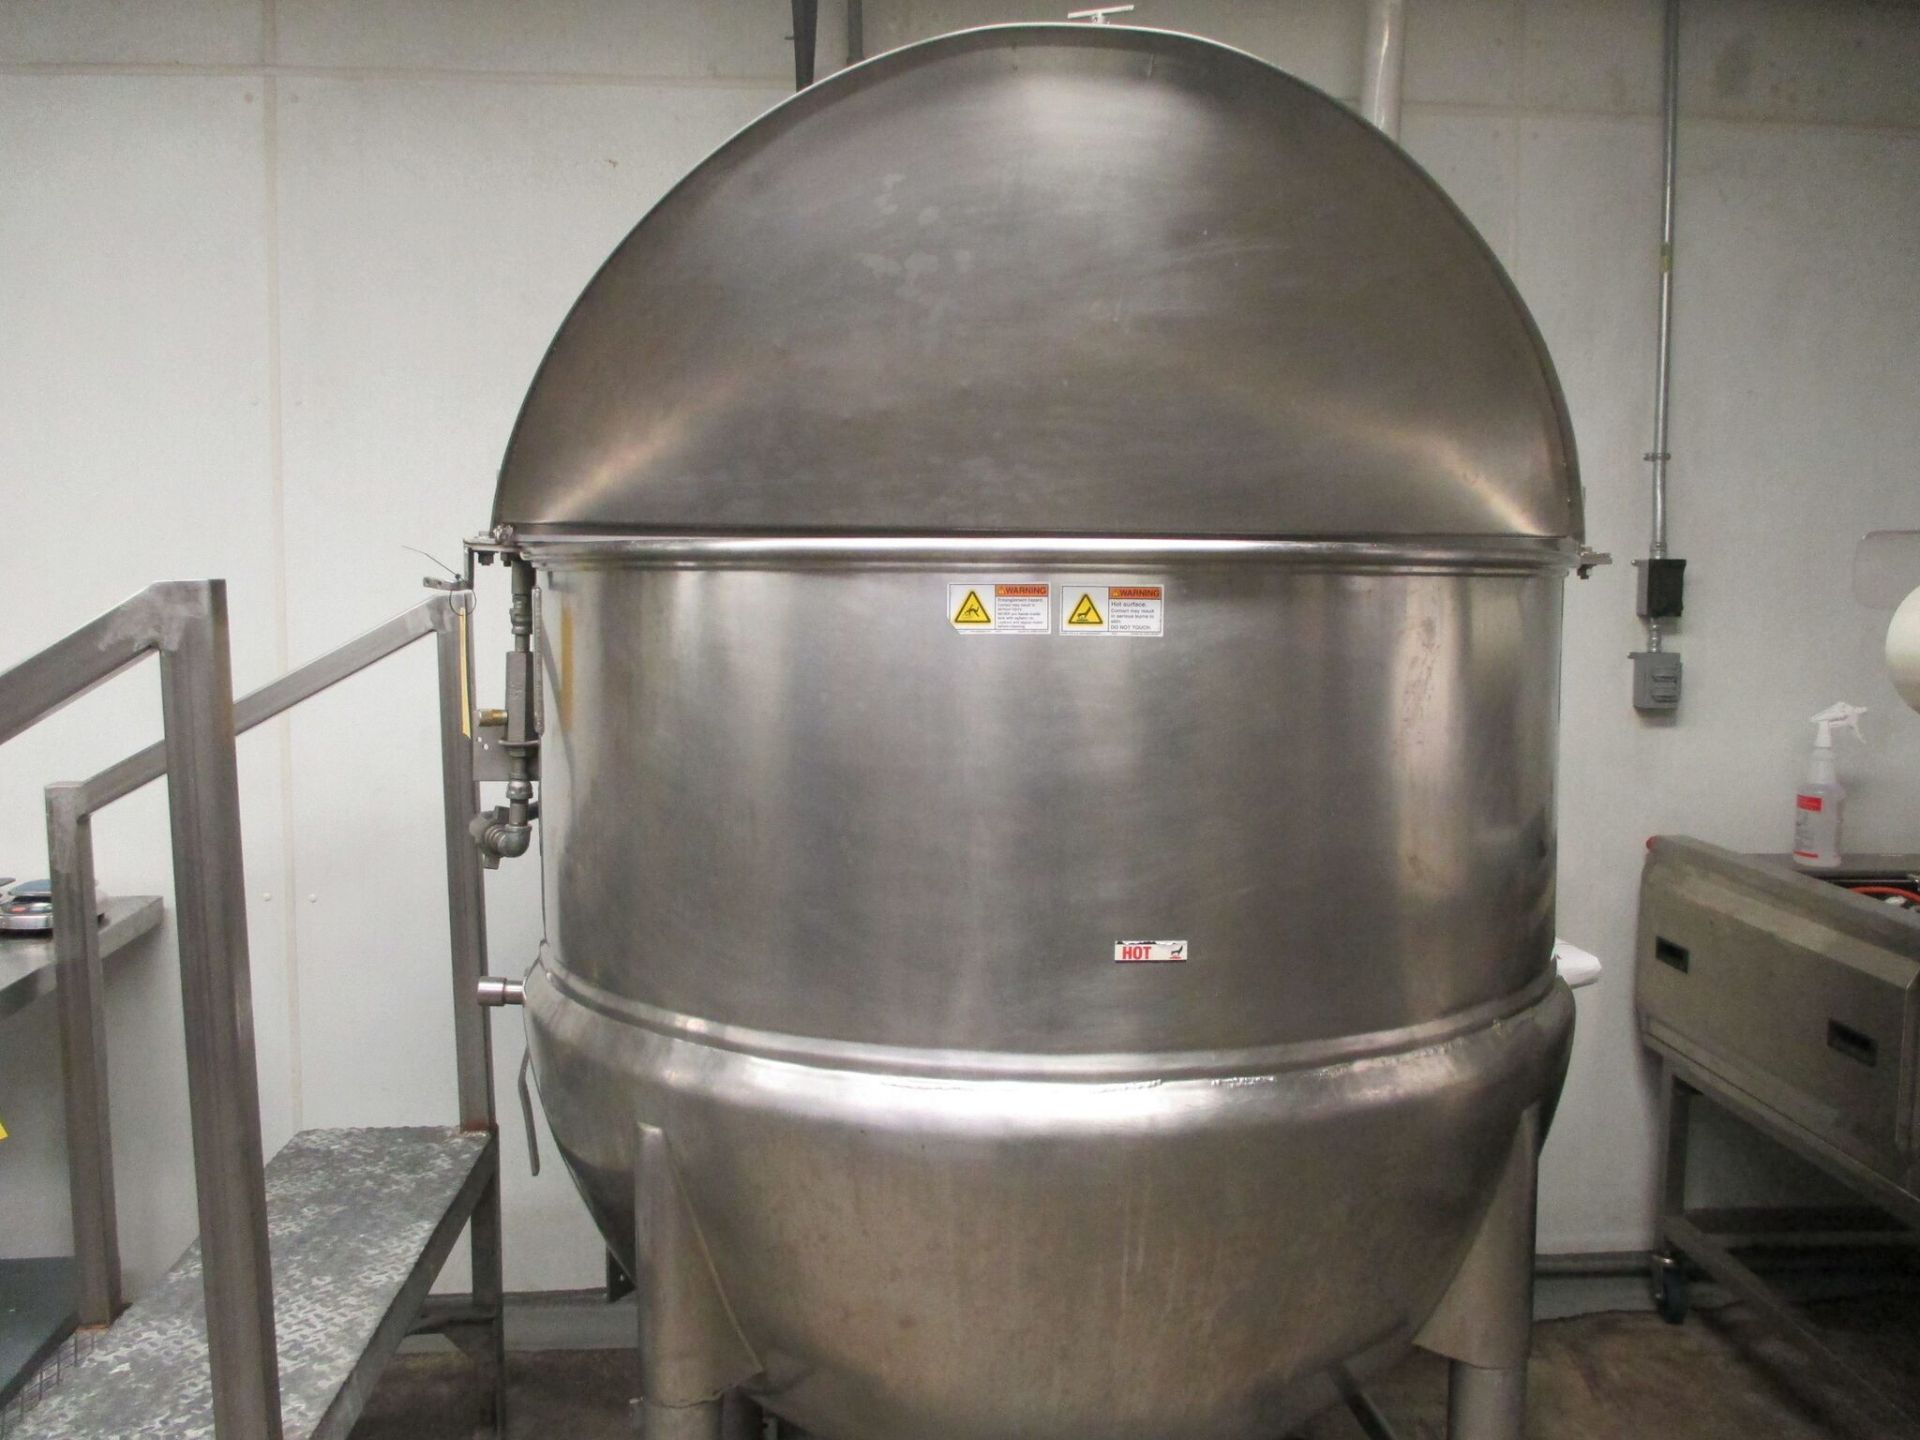 Lee Steam Jacketed Kettle 350g, Hydraulic Drive, Serial #980, RIGGING FEES $800